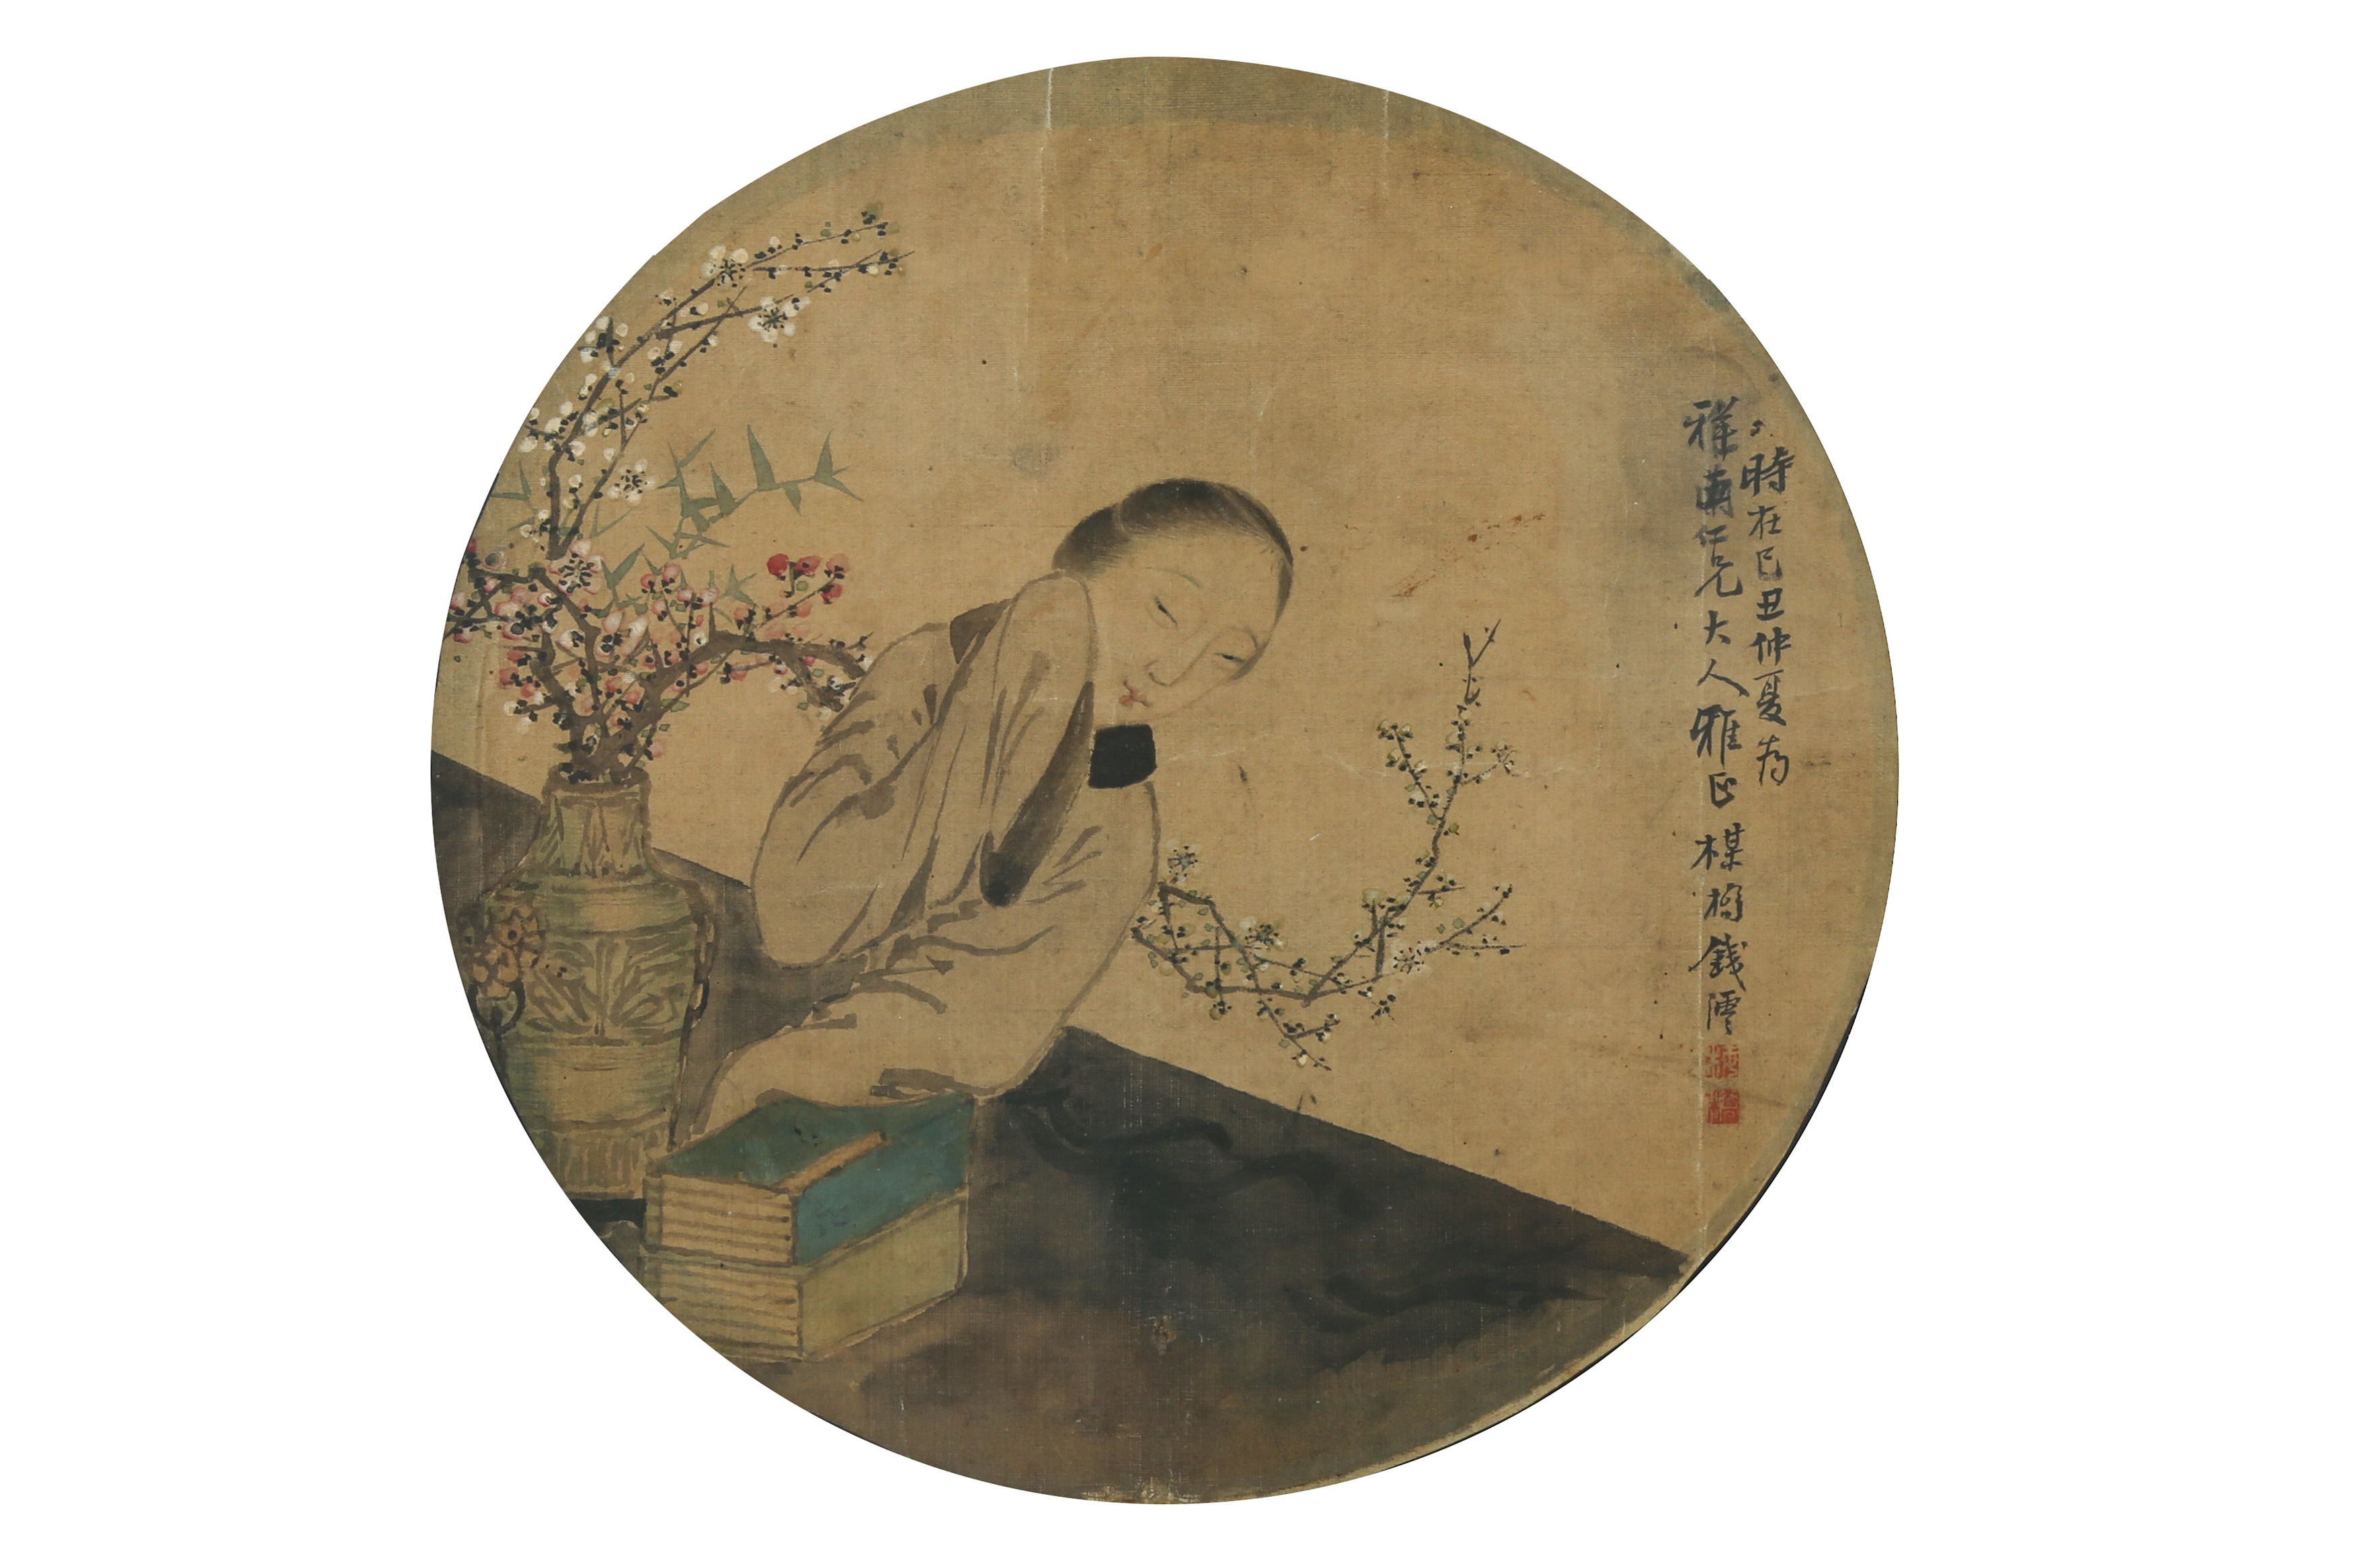 A CHINESE CIRCULAR 'YOUNG READER' FAN PAINTING.